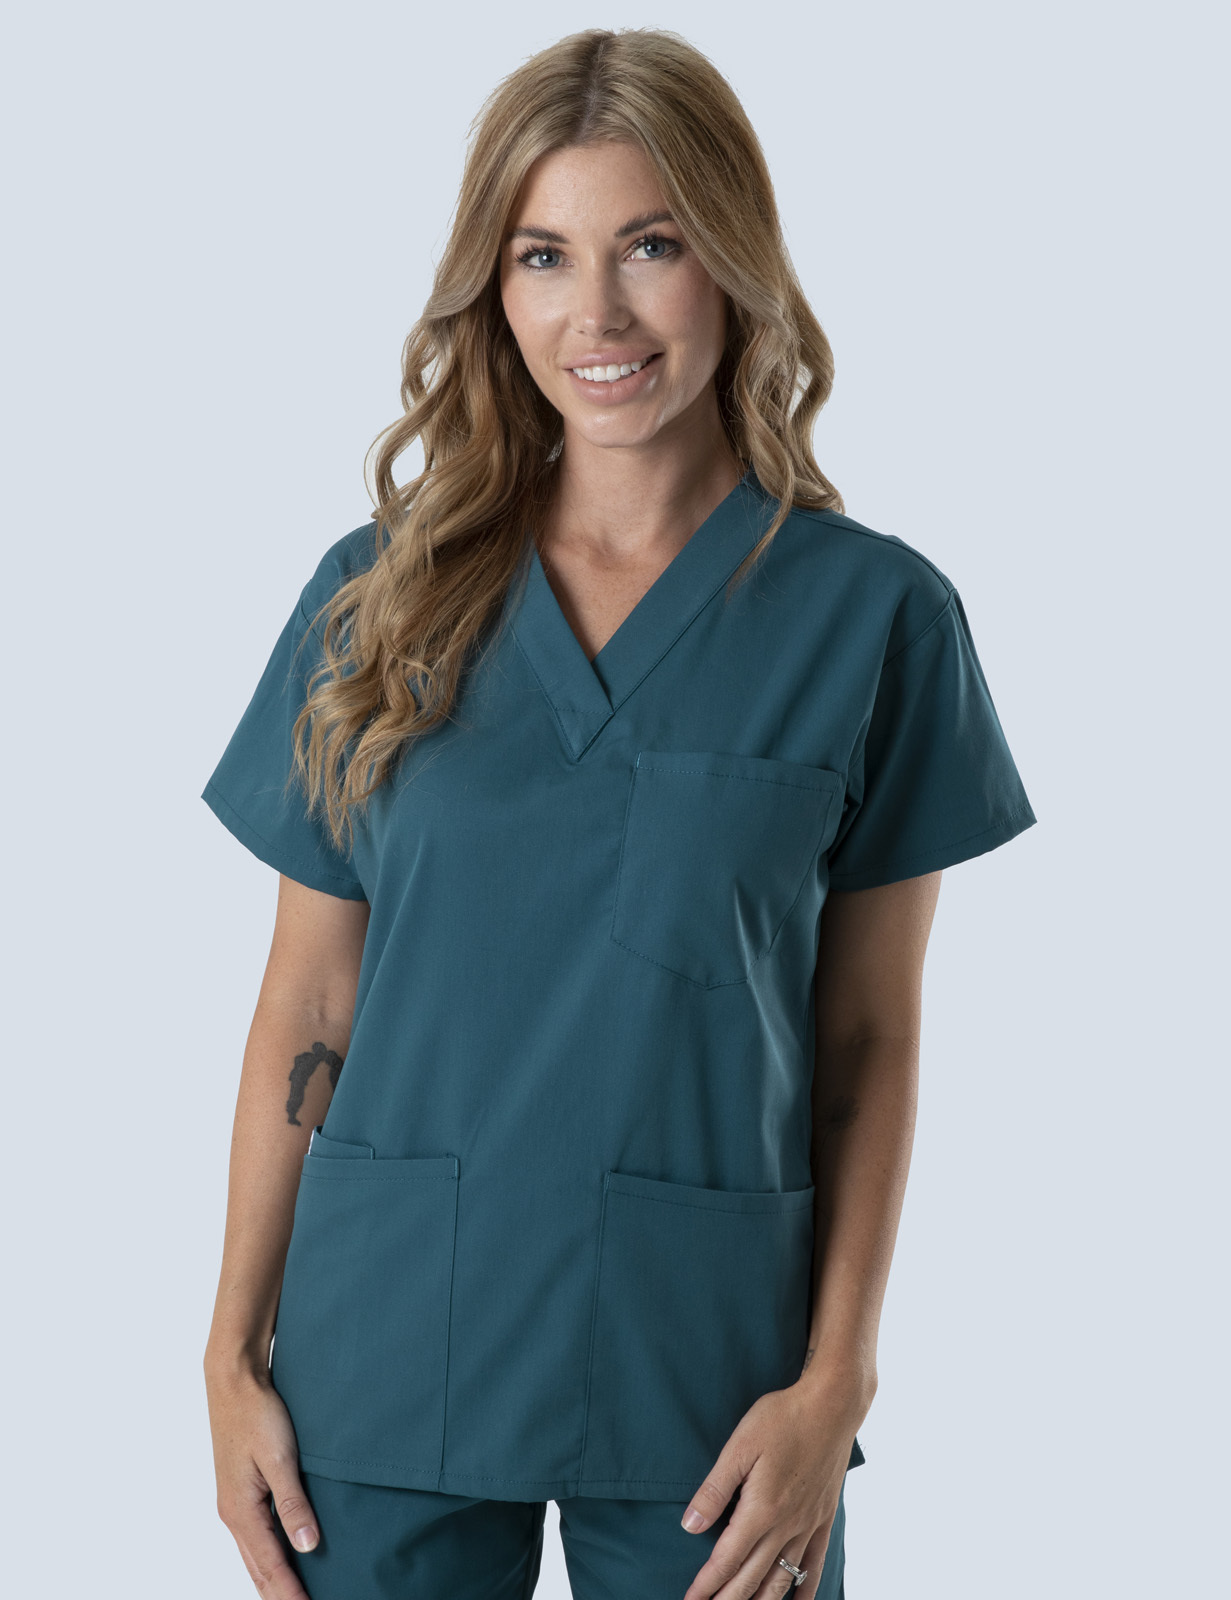 Gladstone Hospital - Medical Surgical (4 Pocket Scrub Top and Cargo Pants in Caribbean incl Logos)